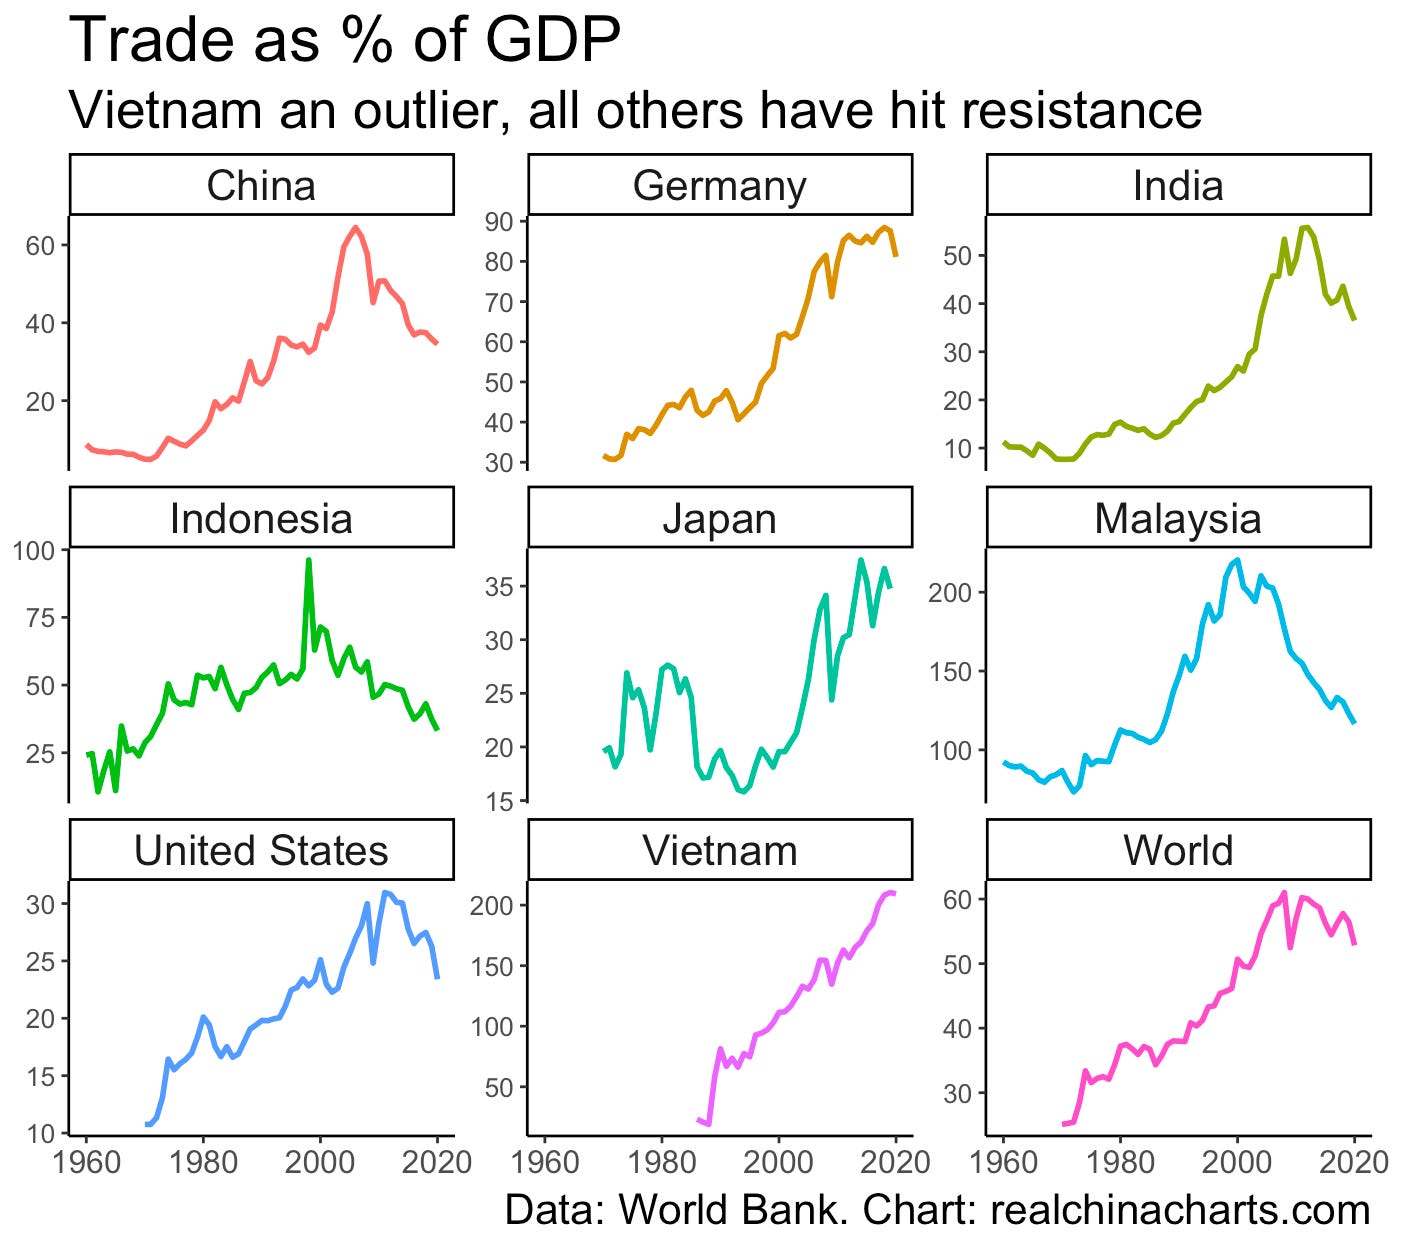 Trade as percentage of GDP by country